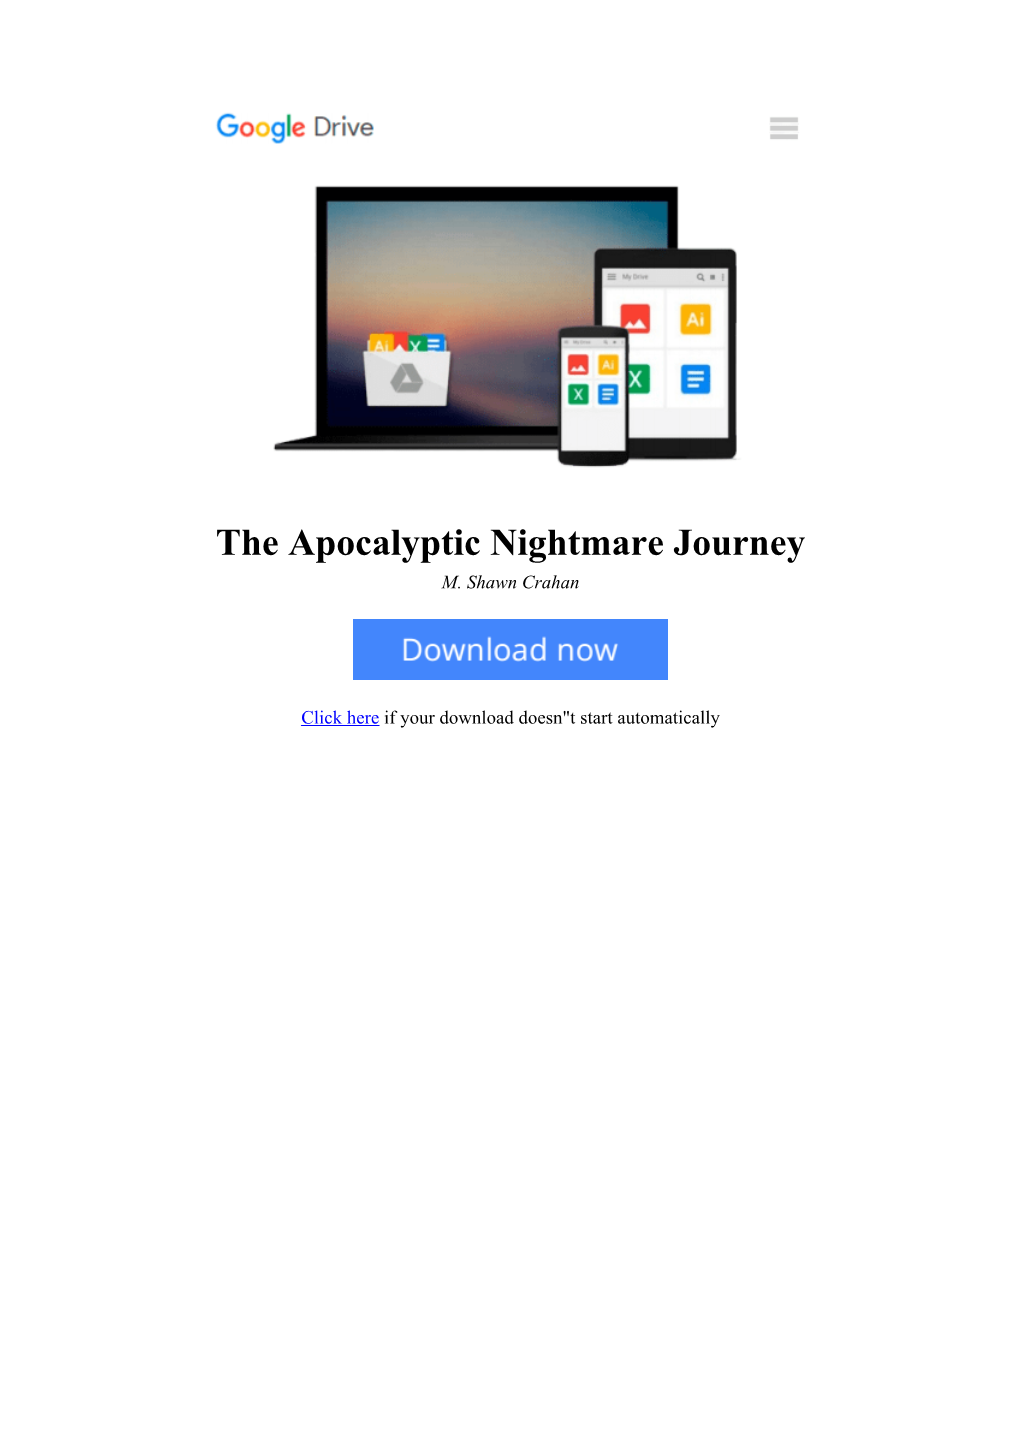 [1JLQ]⋙ the Apocalyptic Nightmare Journey by M. Shawn Crahan